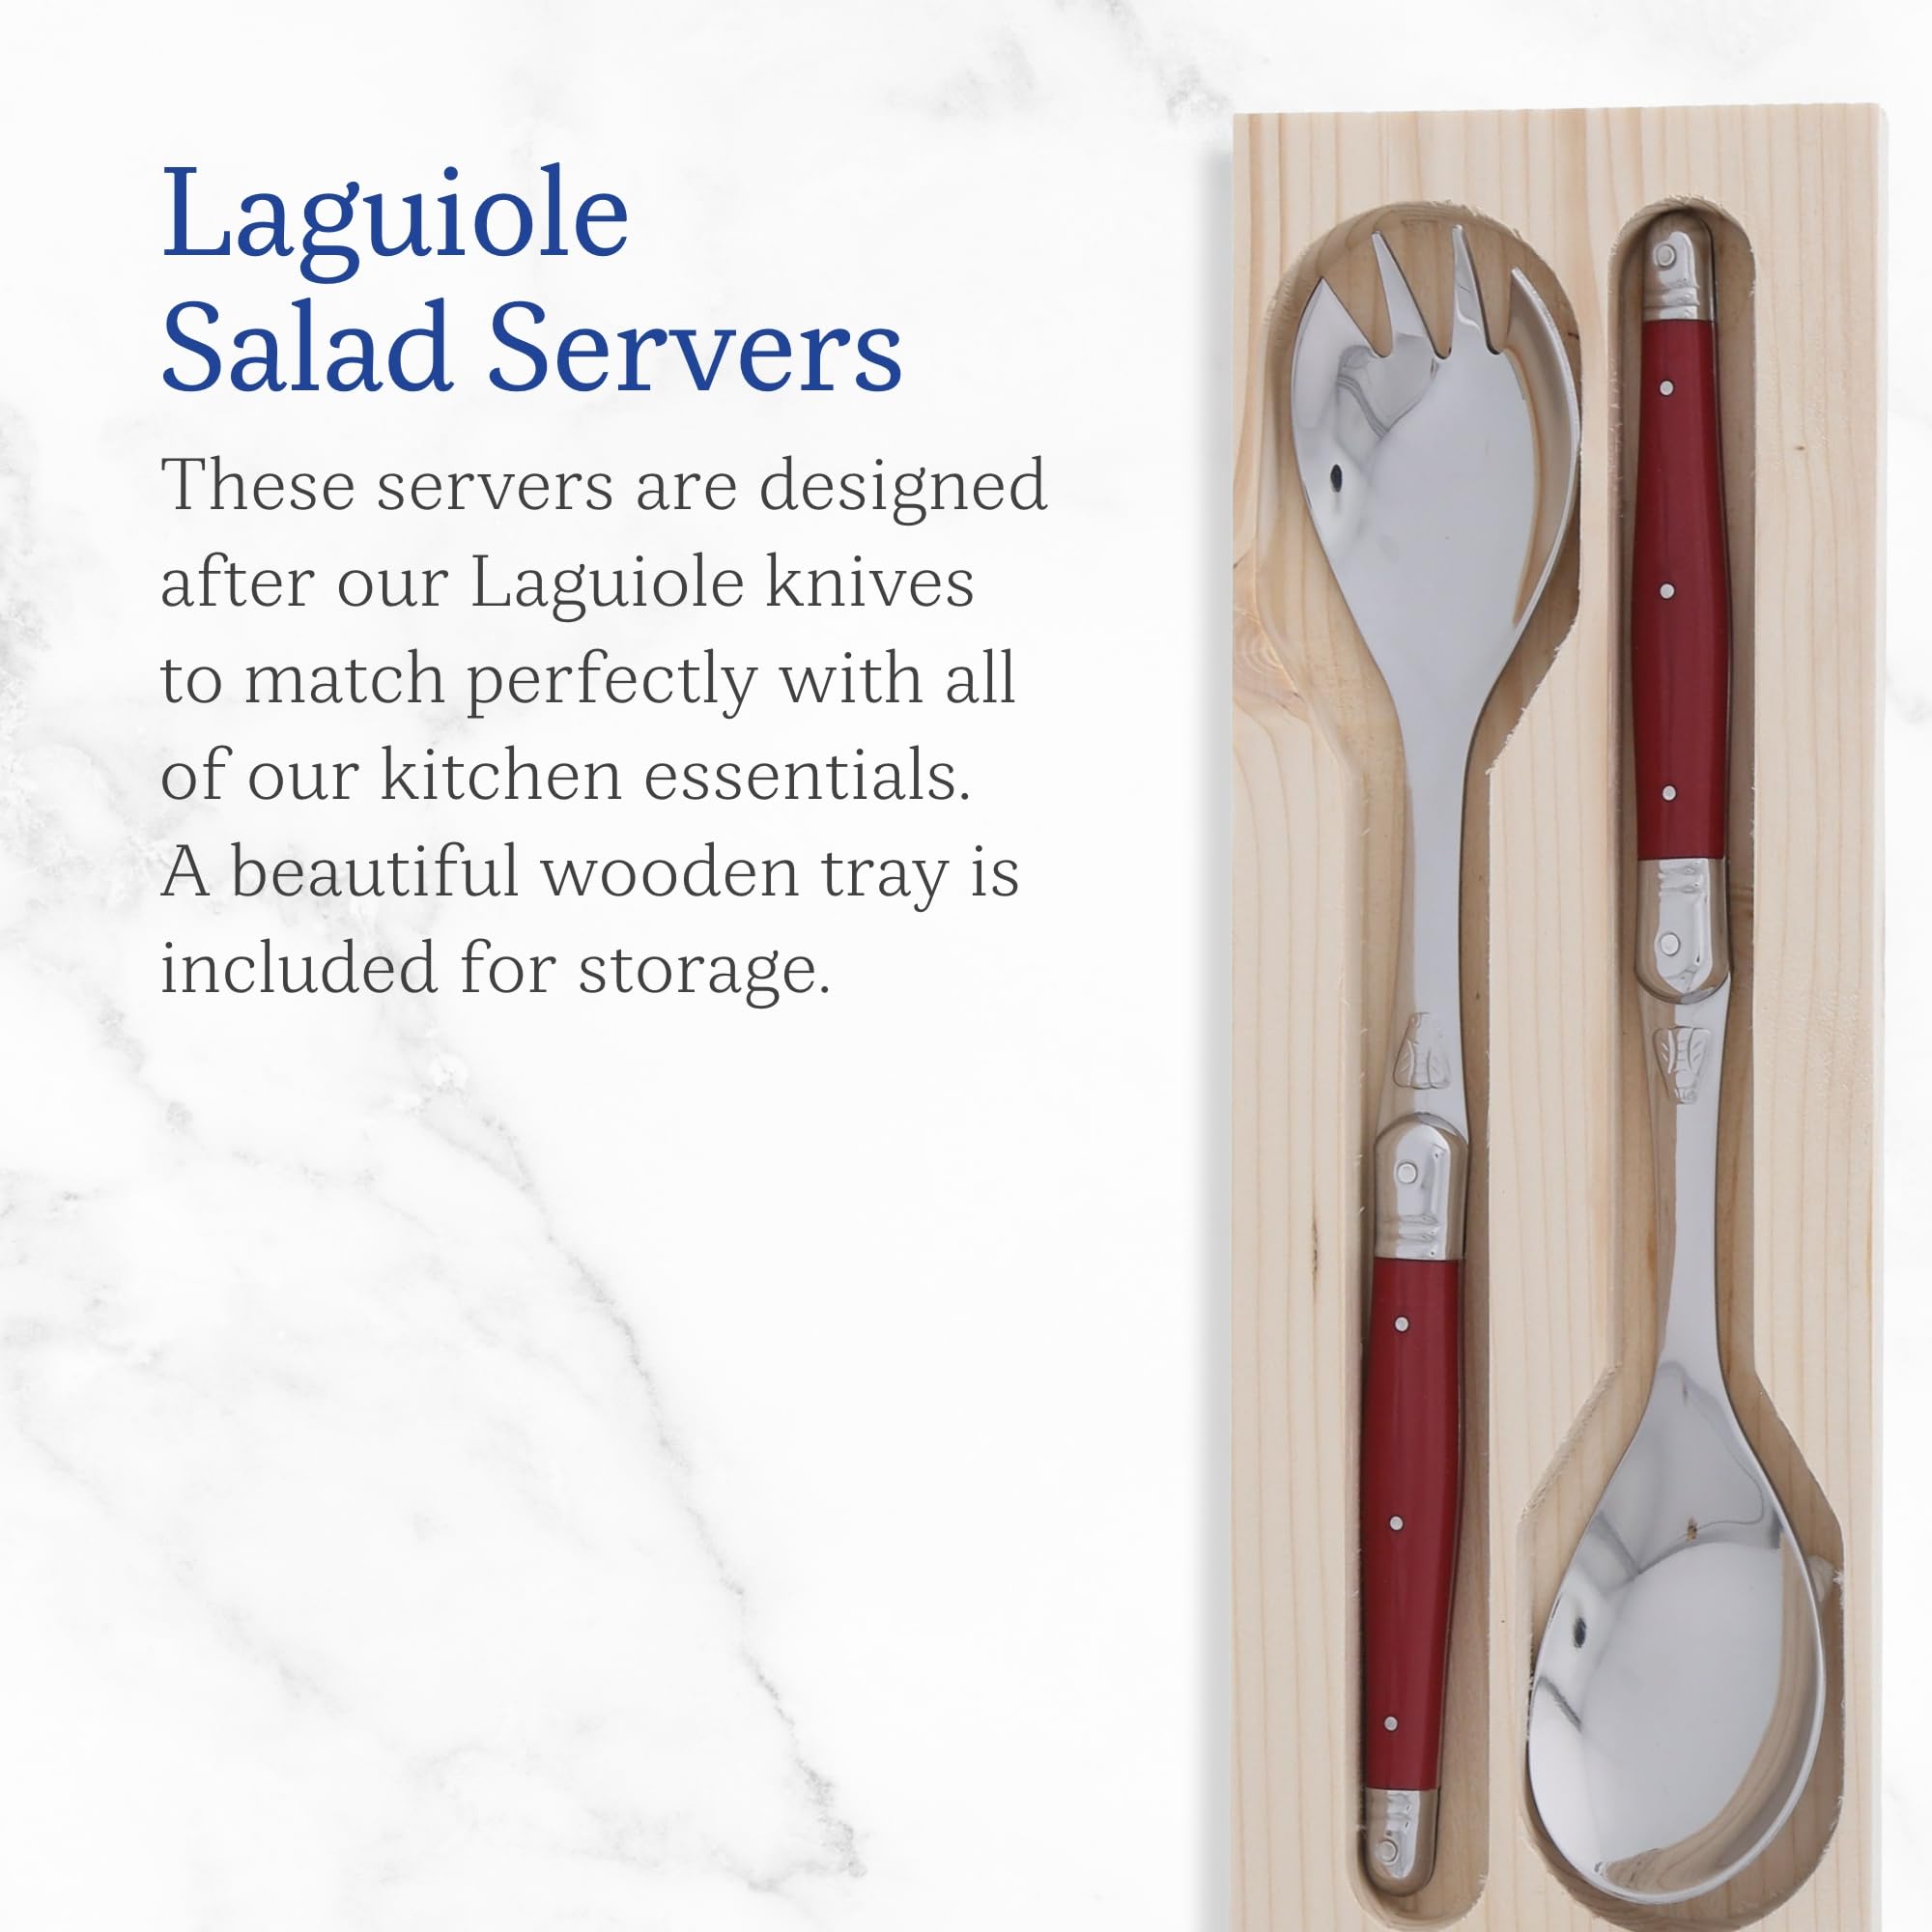 Jean Dubost Salad Servers, Red Handles - Rust-Resistant Stainless Steel - Includes Wooden Tray - Made in France